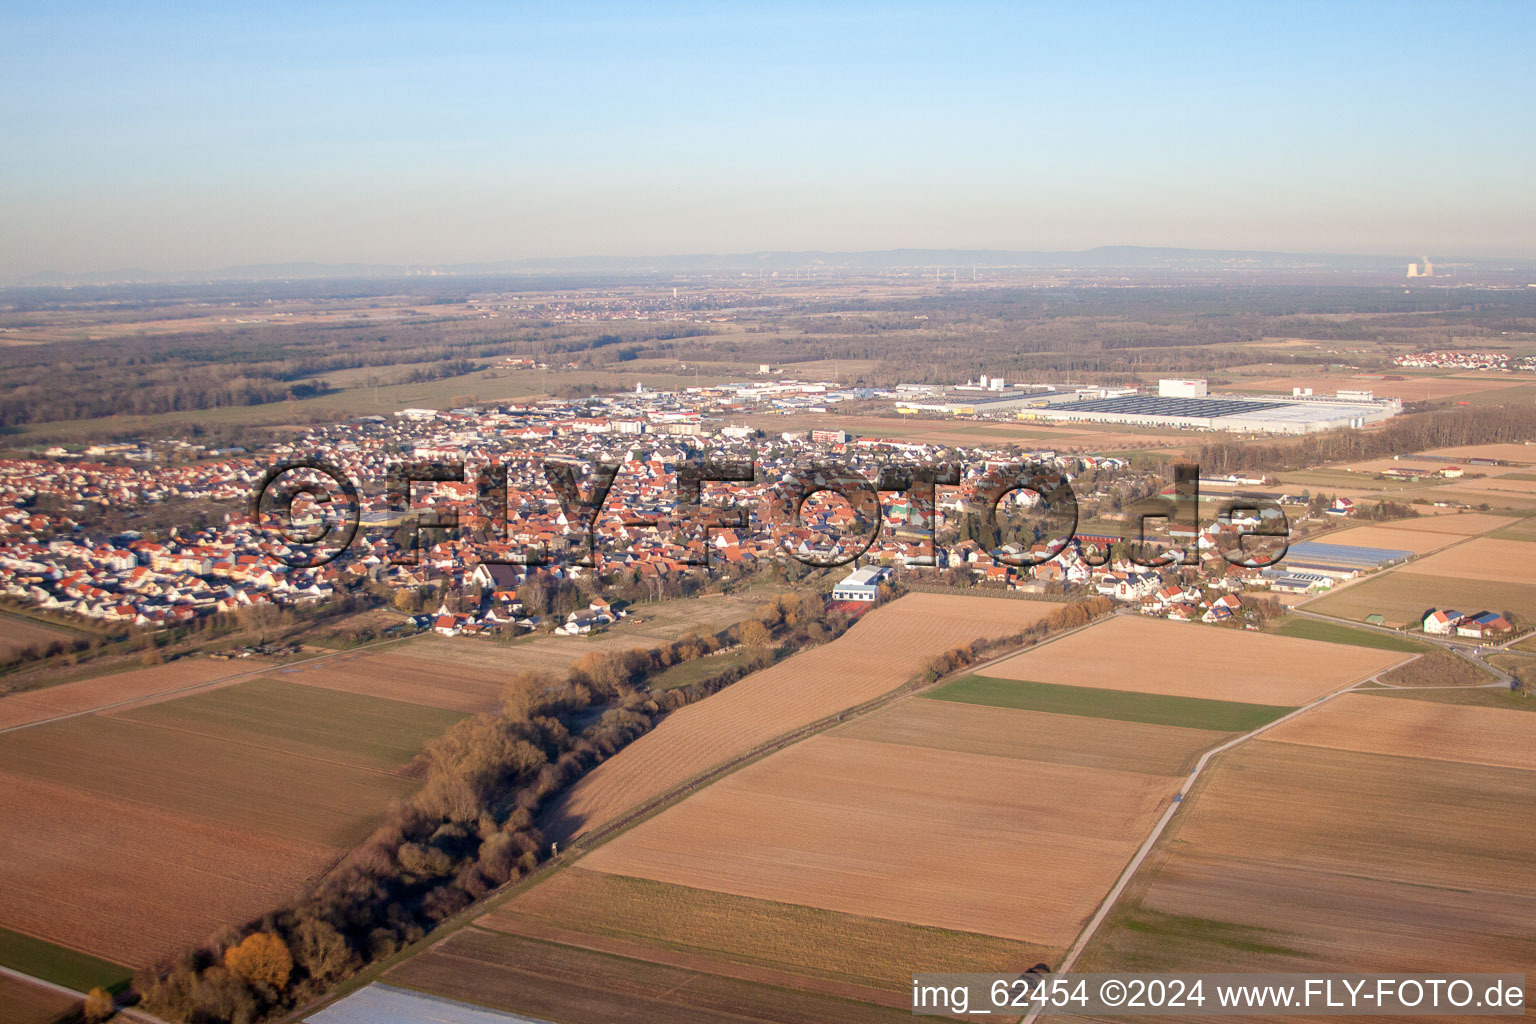 Offenbach an der Queich in the state Rhineland-Palatinate, Germany from a drone